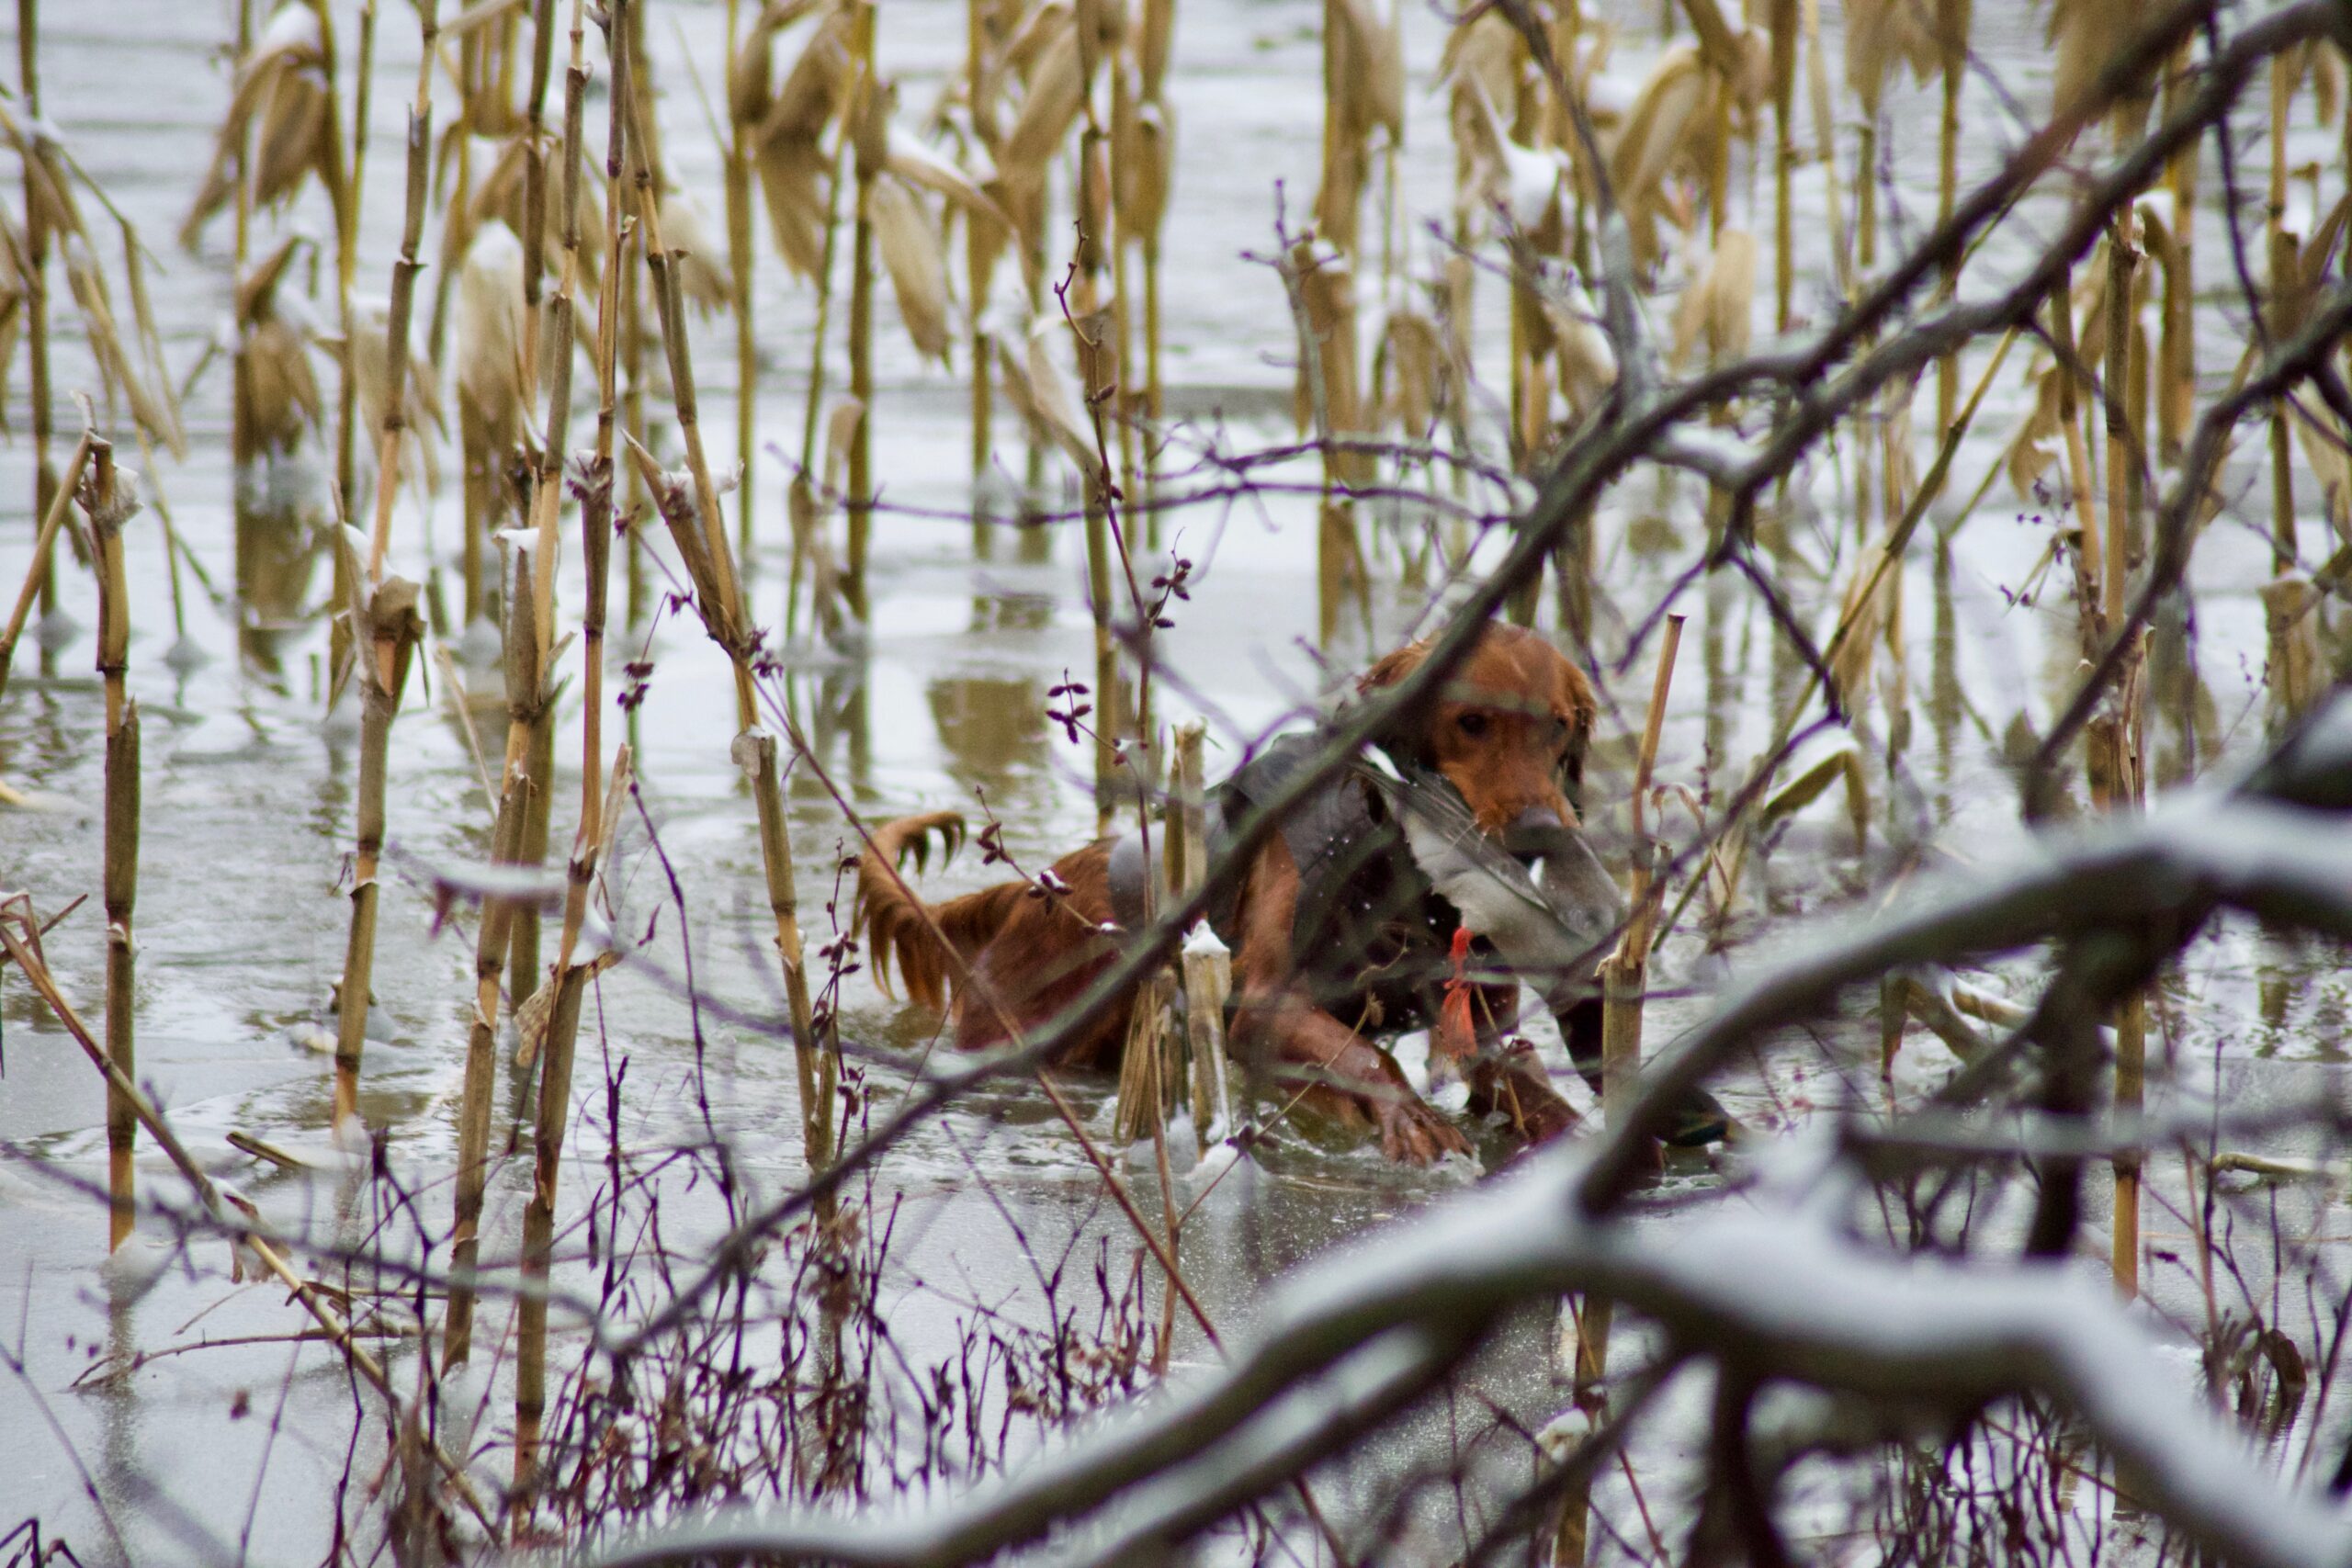 Dog in the flooded corn.